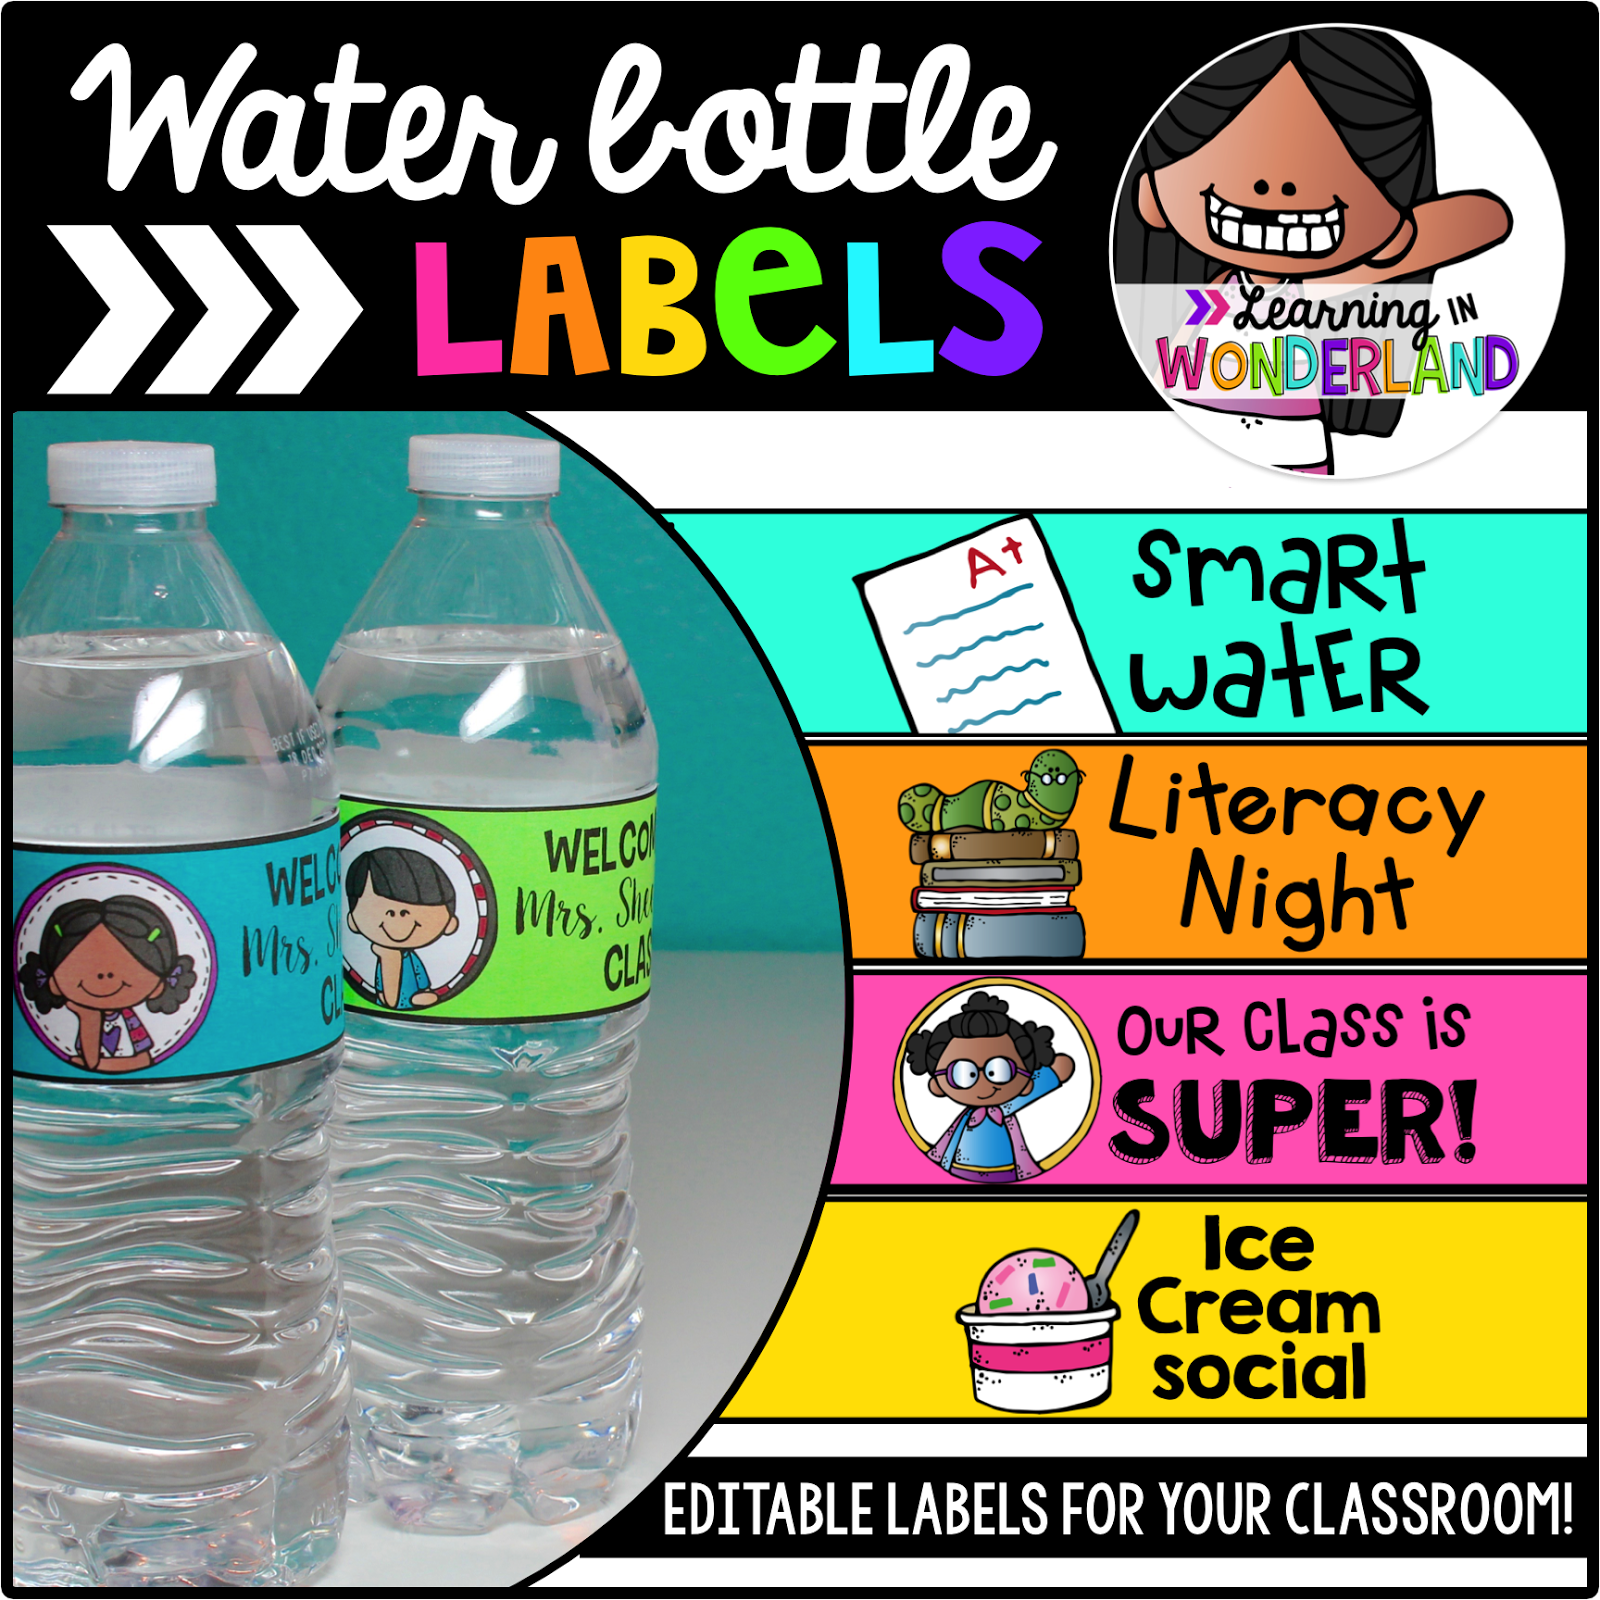 Editable water bottle labels for your classroom events! 